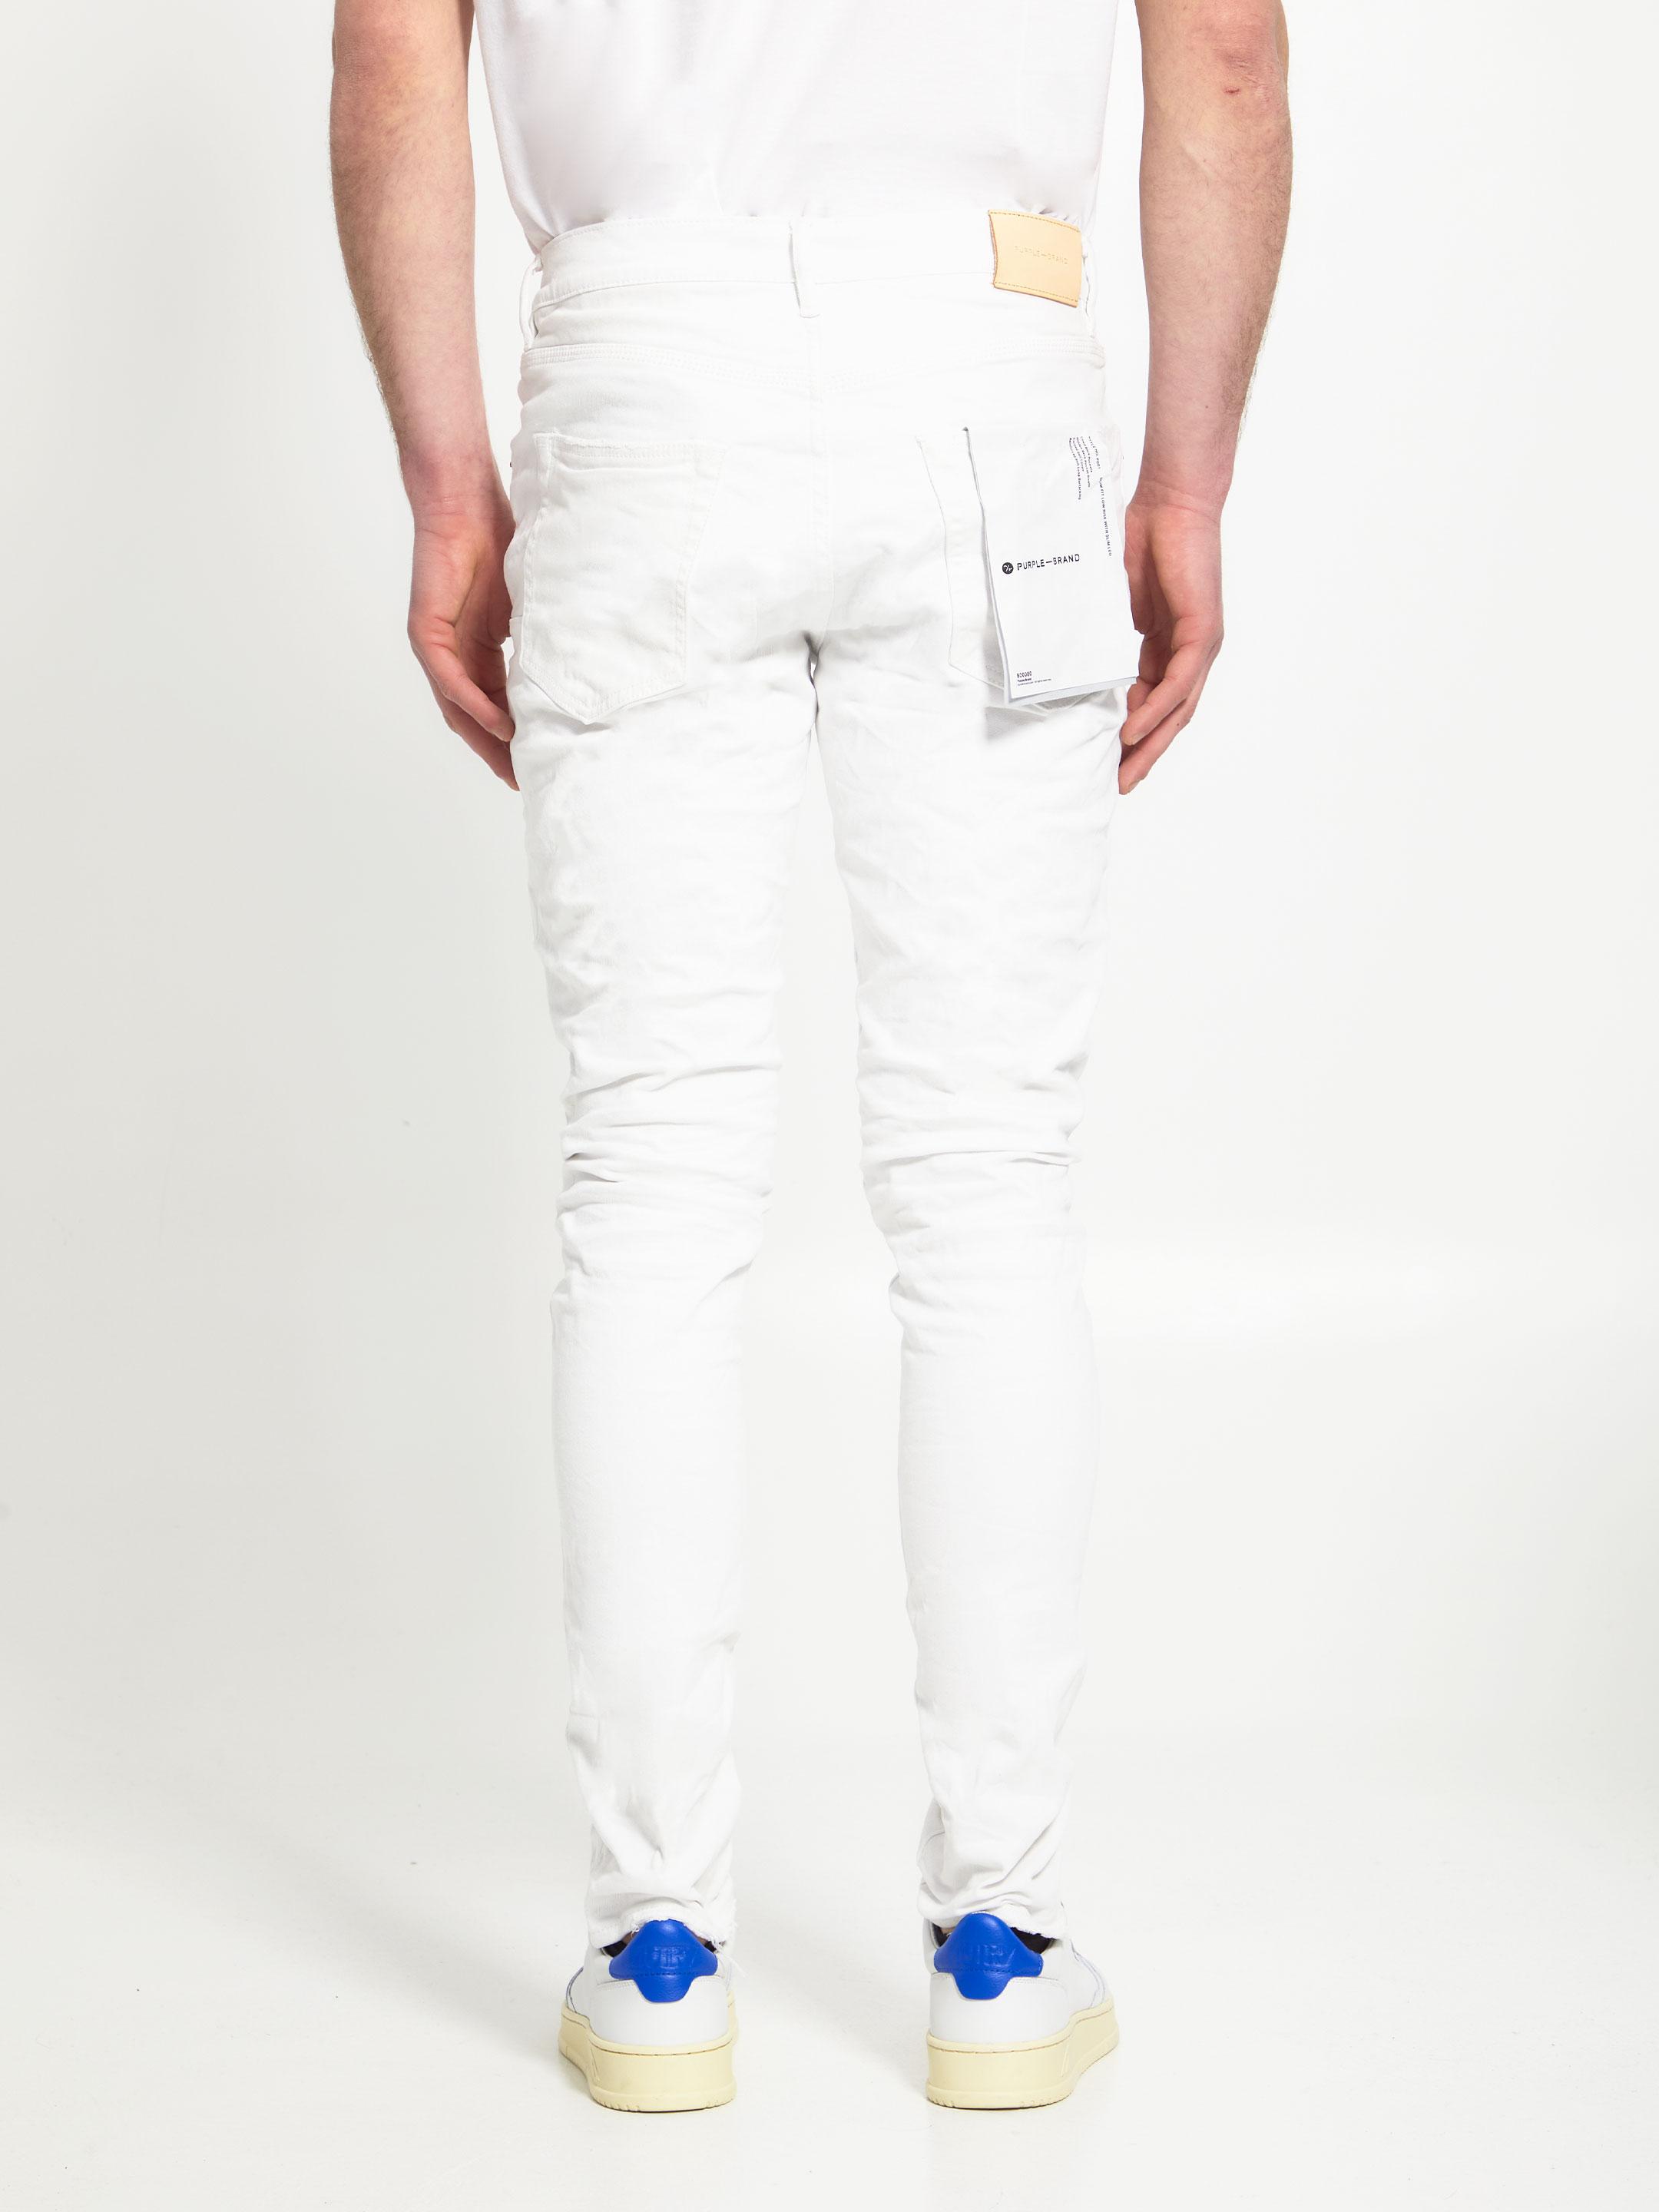 Blue White Ombre Denim Jeans with Pocket Cut-outs